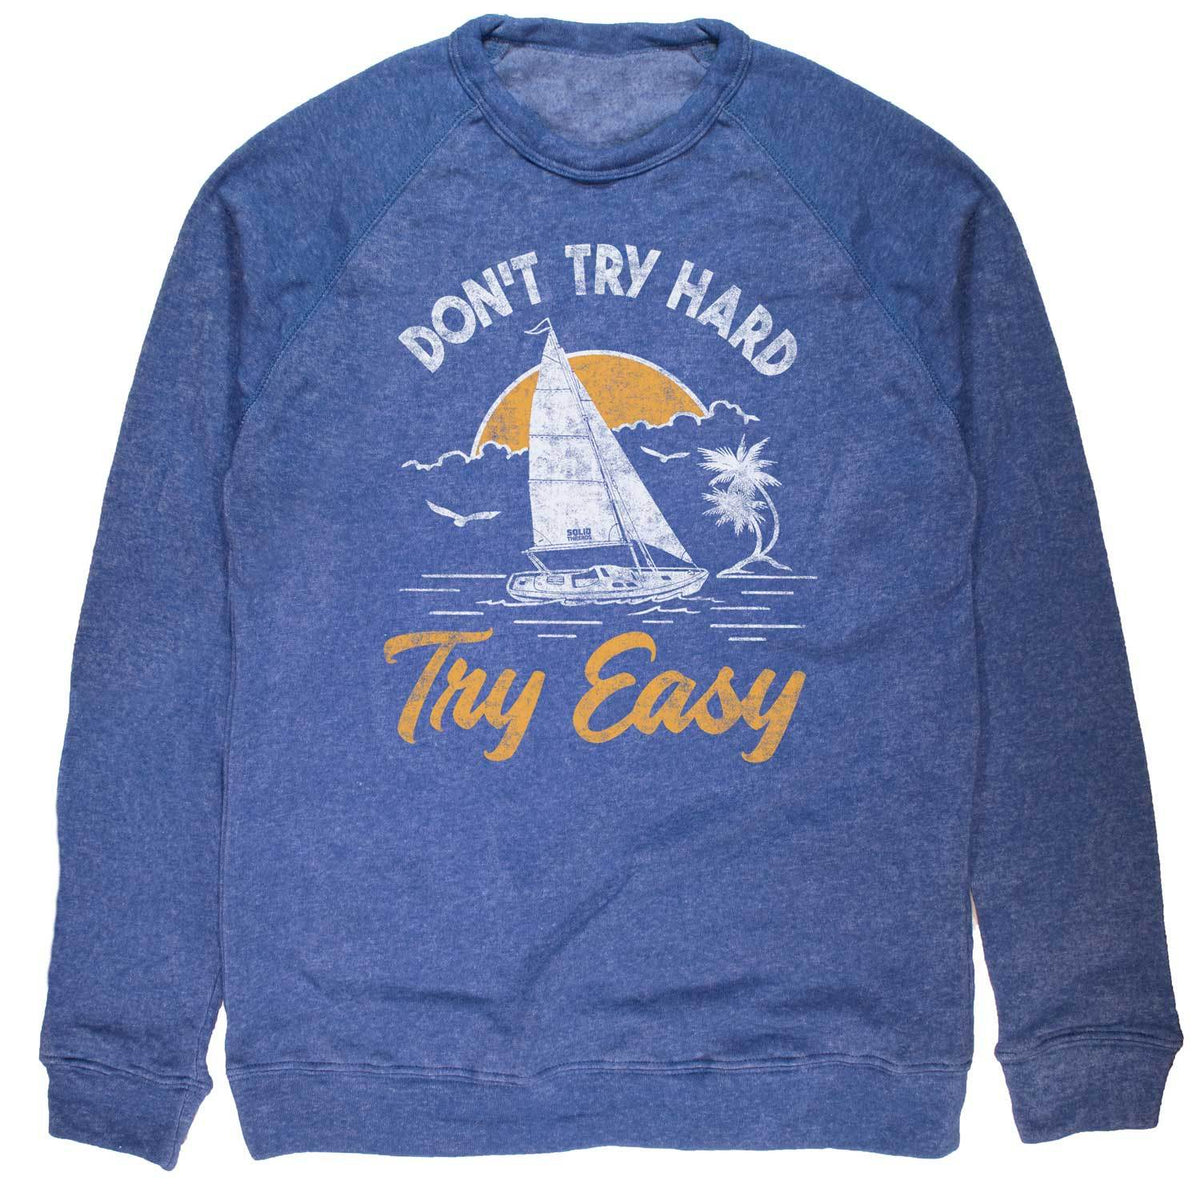 Don&#39;t Try Hard Try Easy Vintage Inspired Fleece Crewneck Sweatshirt with cool sail boat graphic | Solid Threads